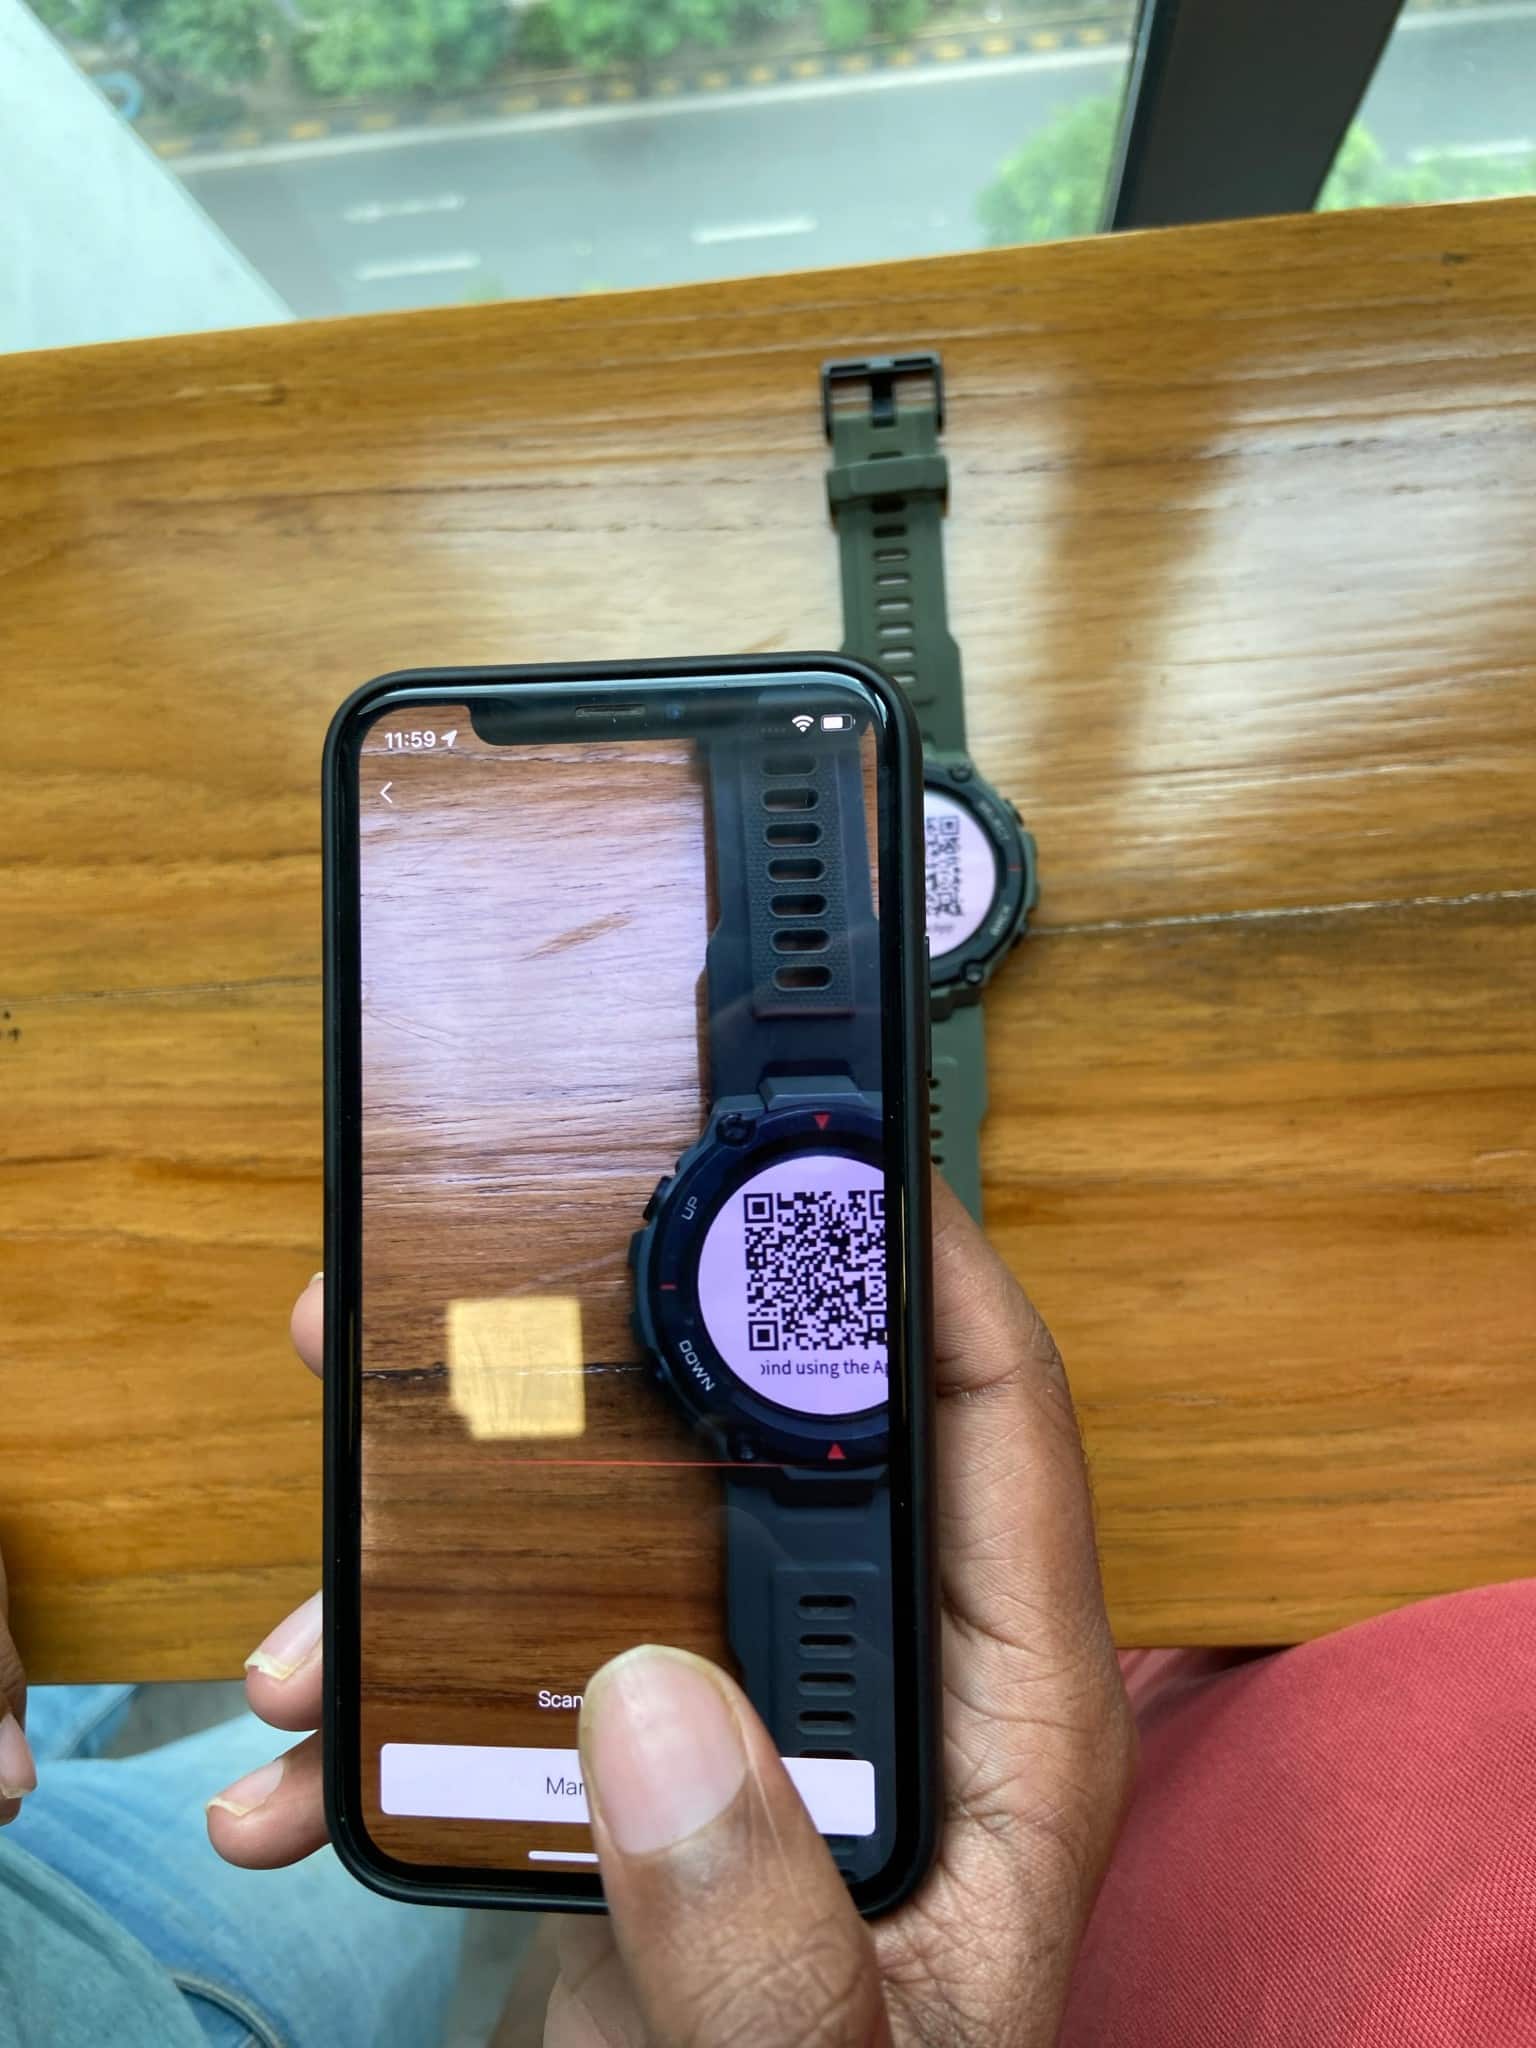 Scan the QR code displayed on the Amazfit watch